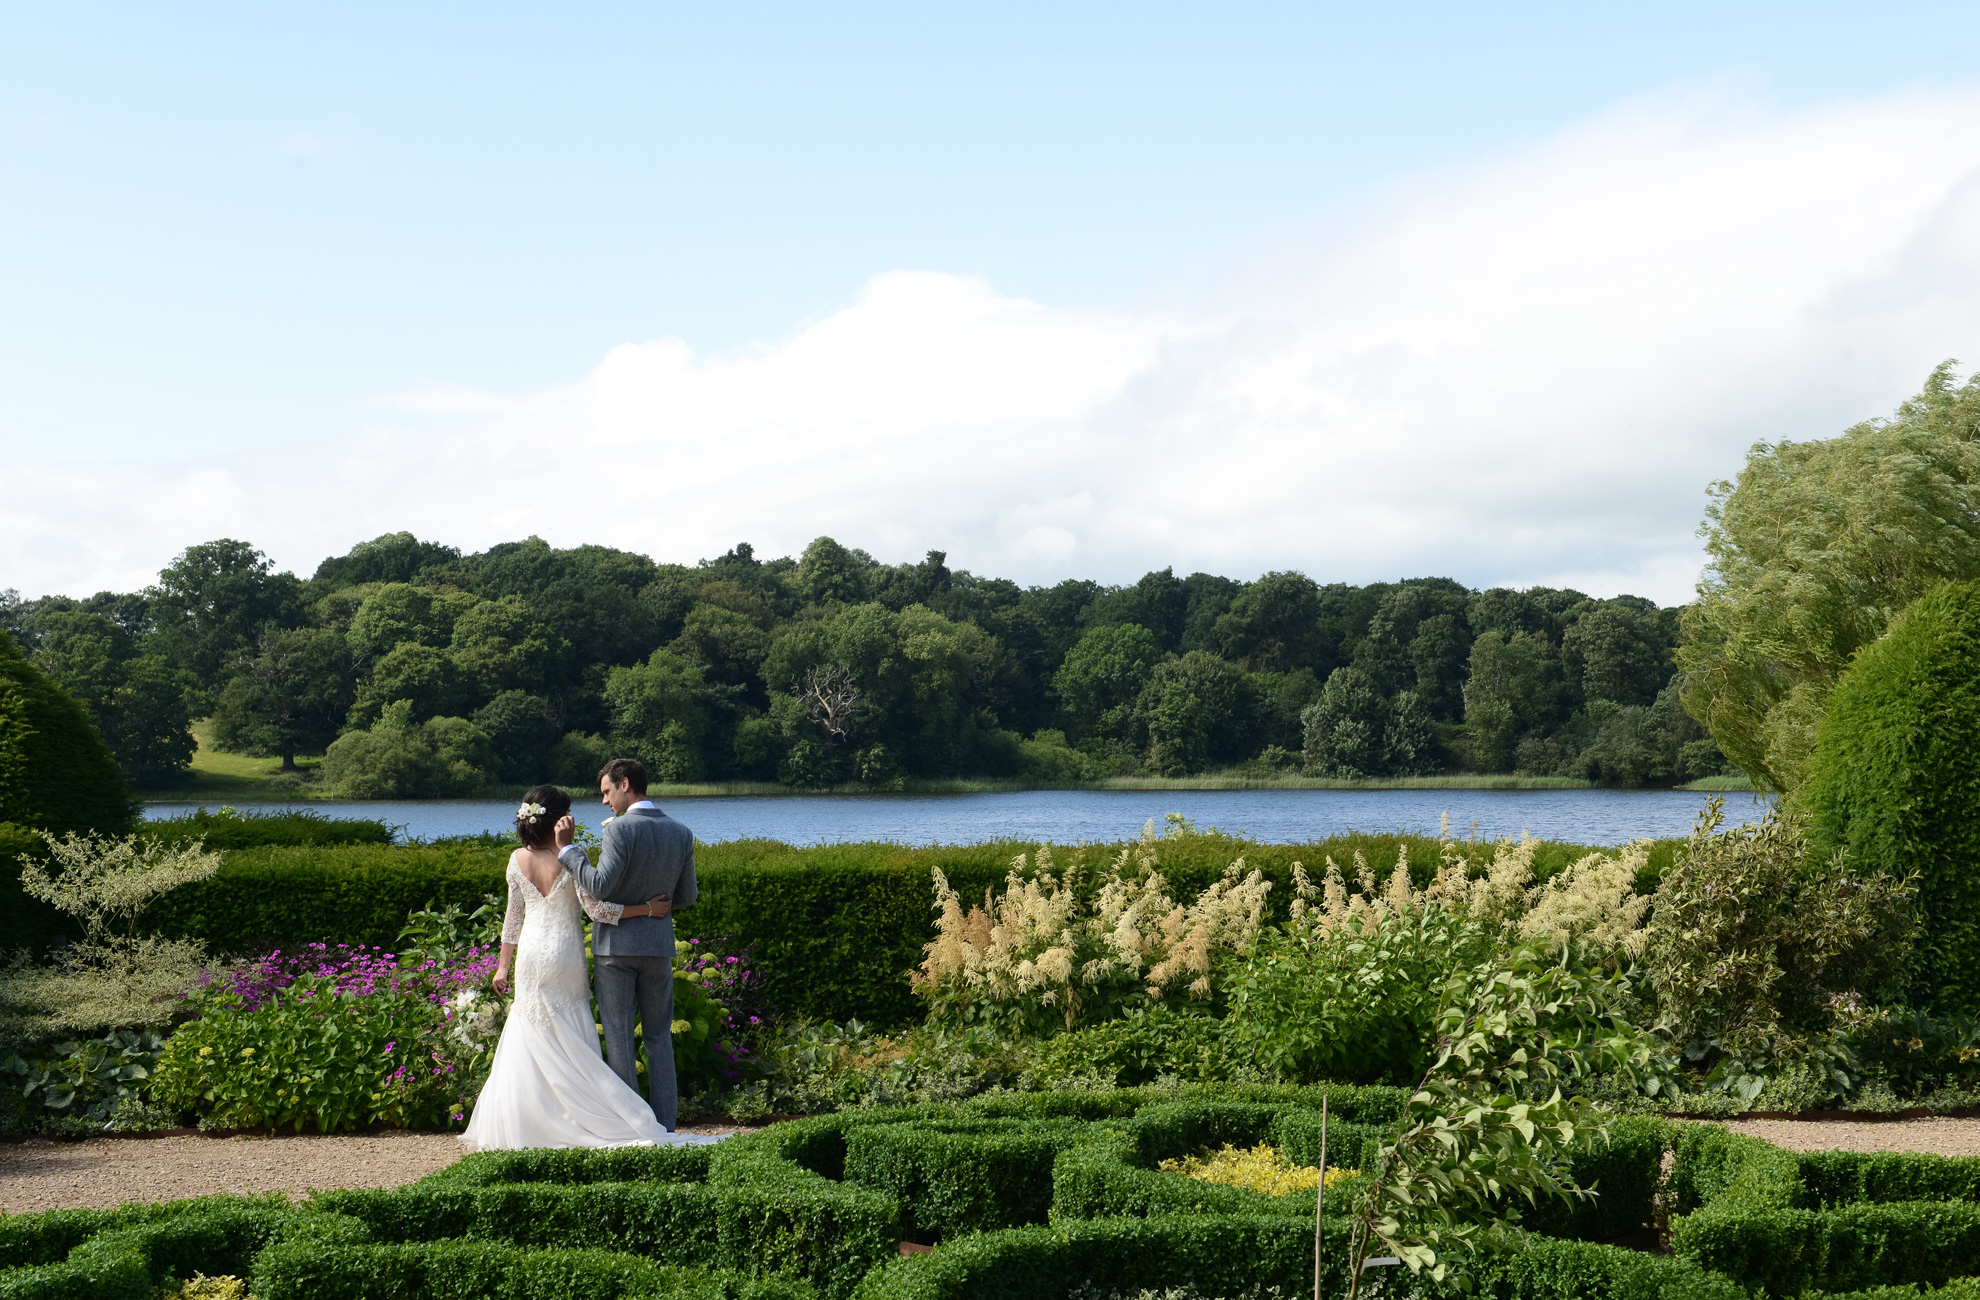 Summer Weddings - Make The Most Of The Gardens at Combermere Abbey